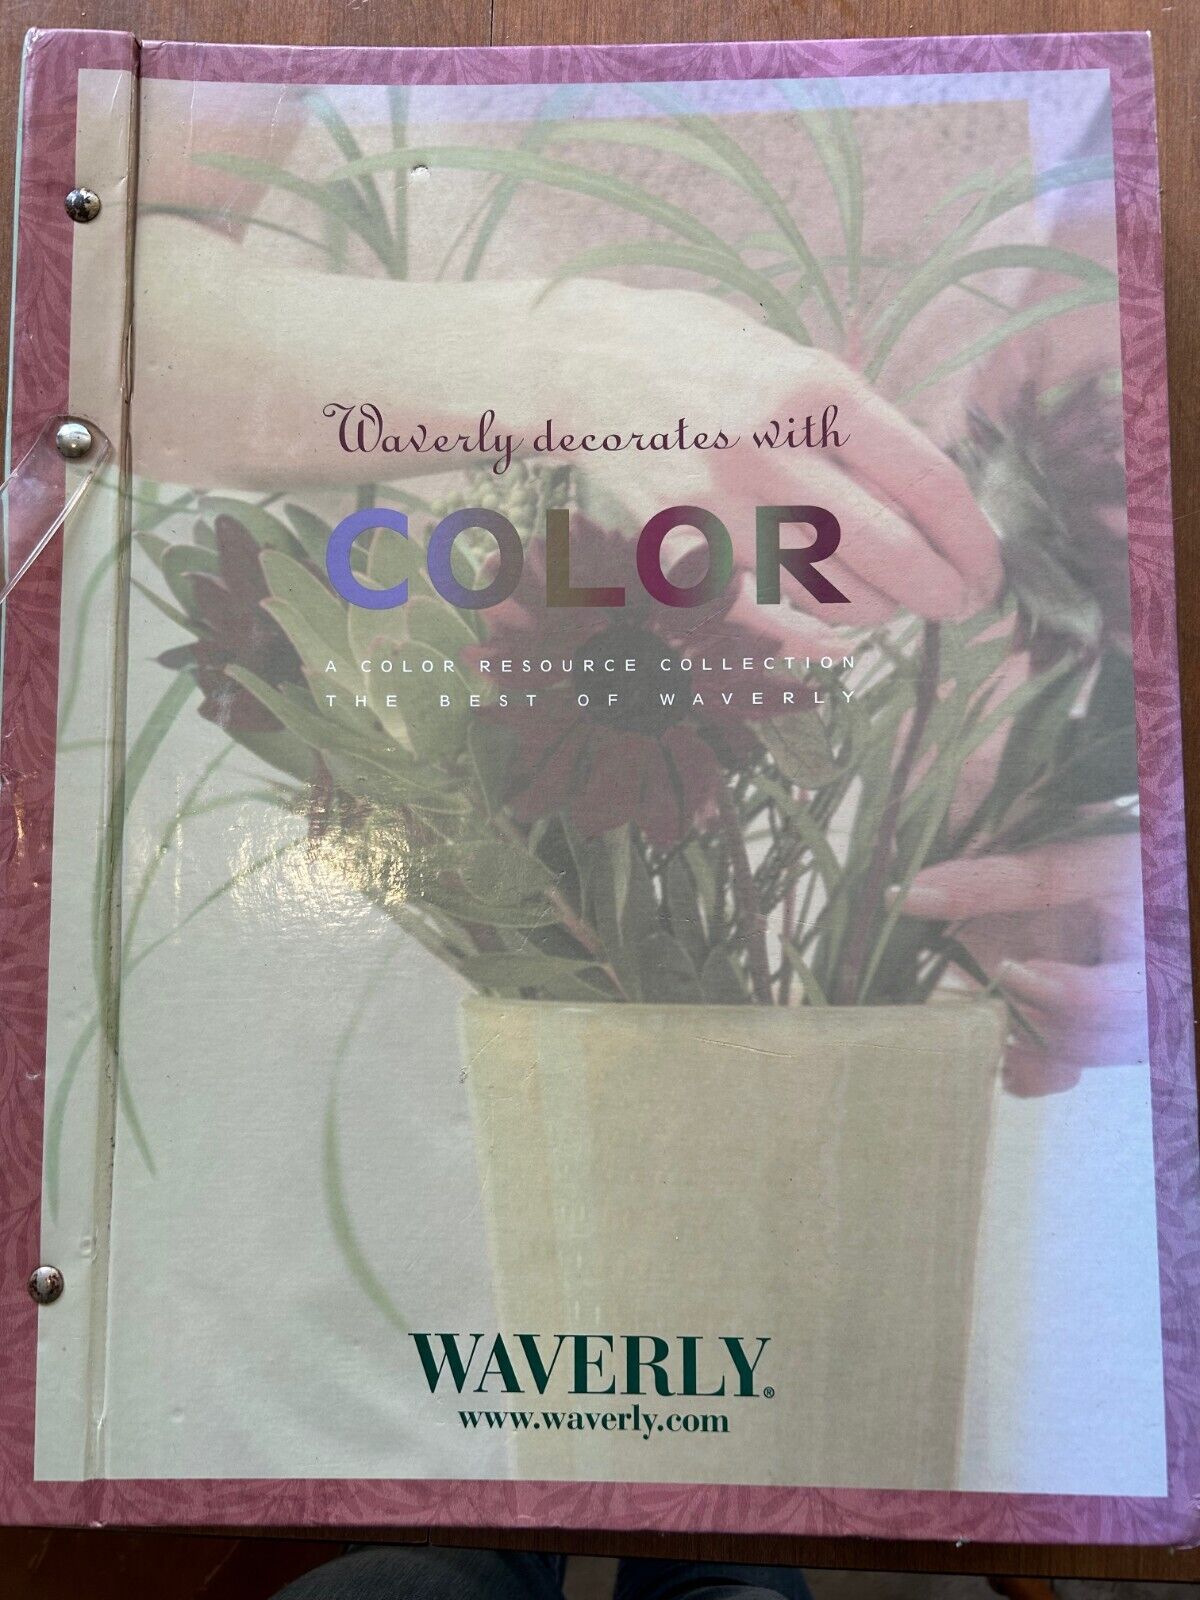 Waverly Decorates With Color Wallpaper Sample Book